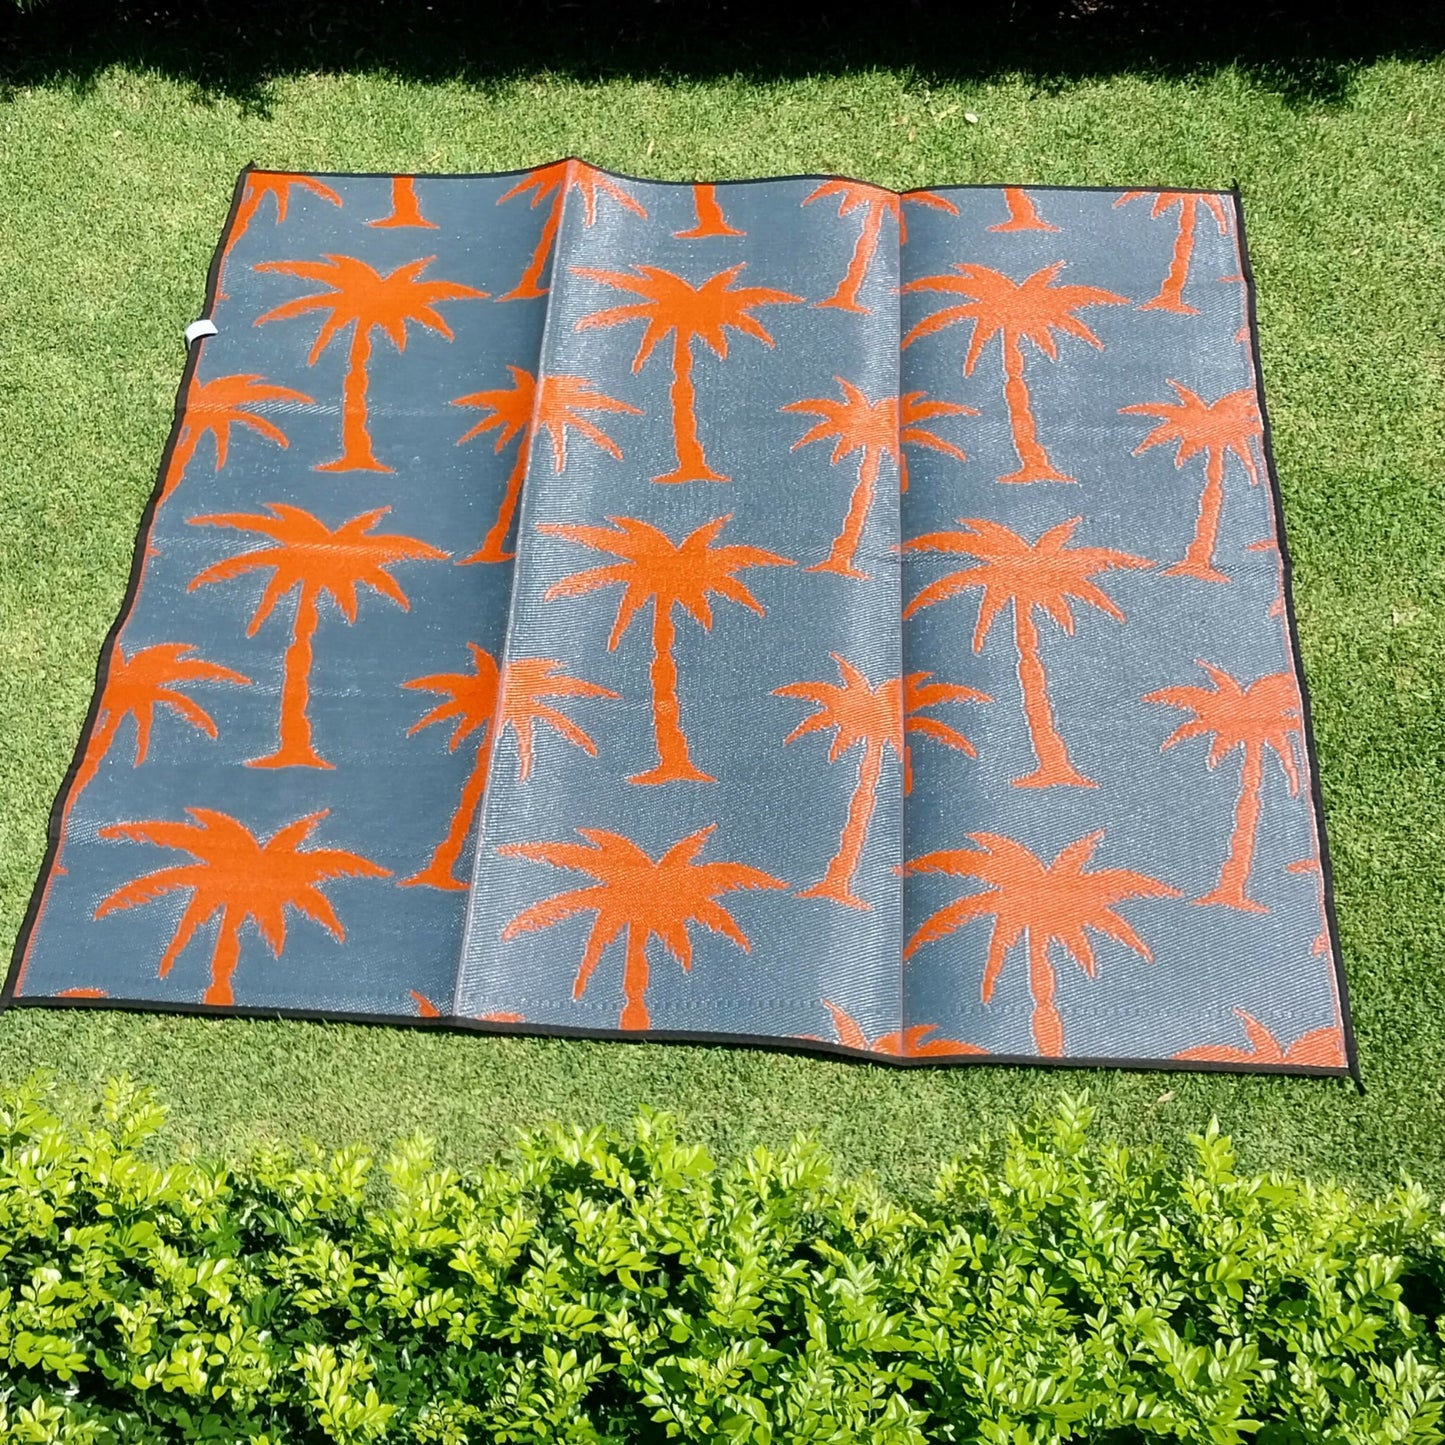 Square Outdoor Mat 2.7m x 2.7m (9ft square) - AMD Touring